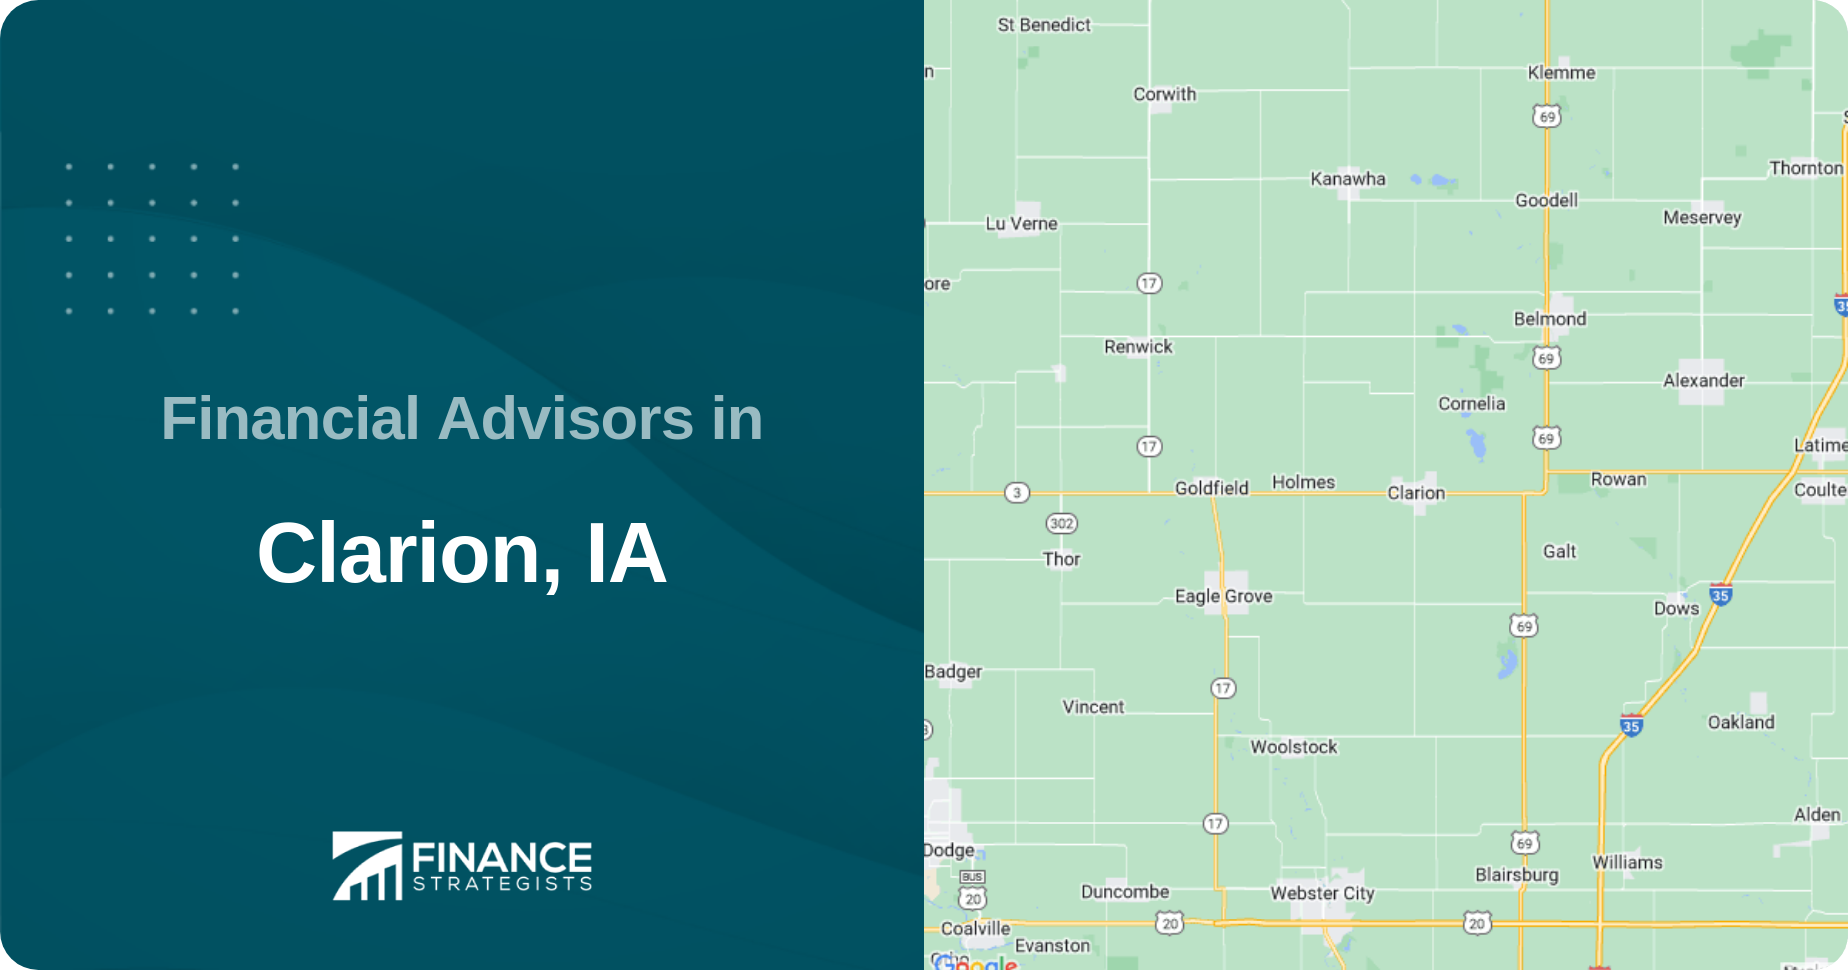 Financial Advisors in Clarion, IA